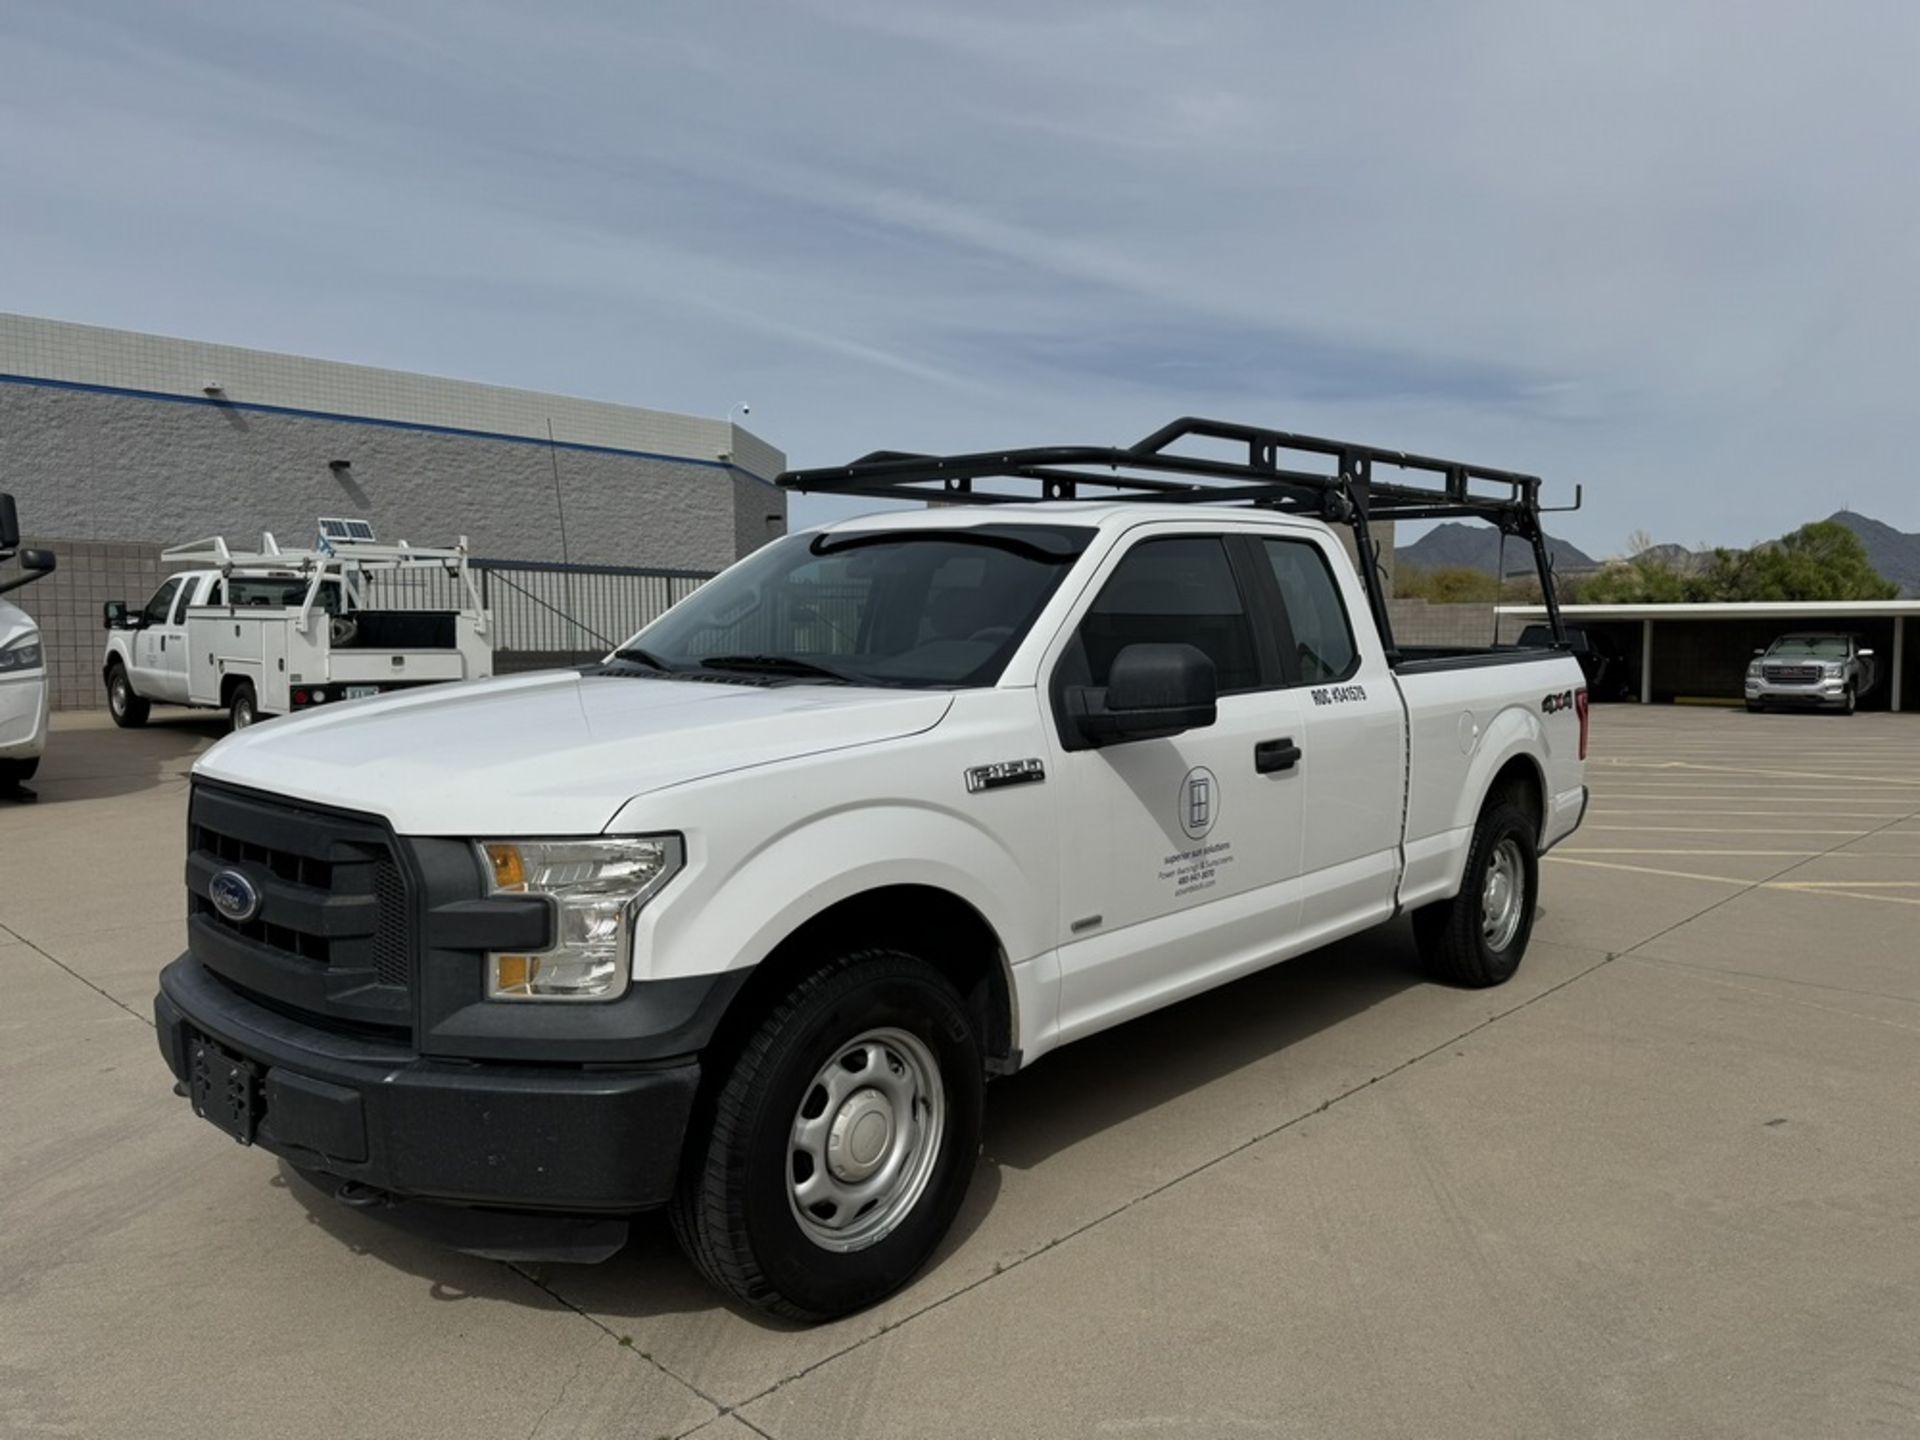 2016 Ford F-150, SuperCab XLT Truck - Image 7 of 21